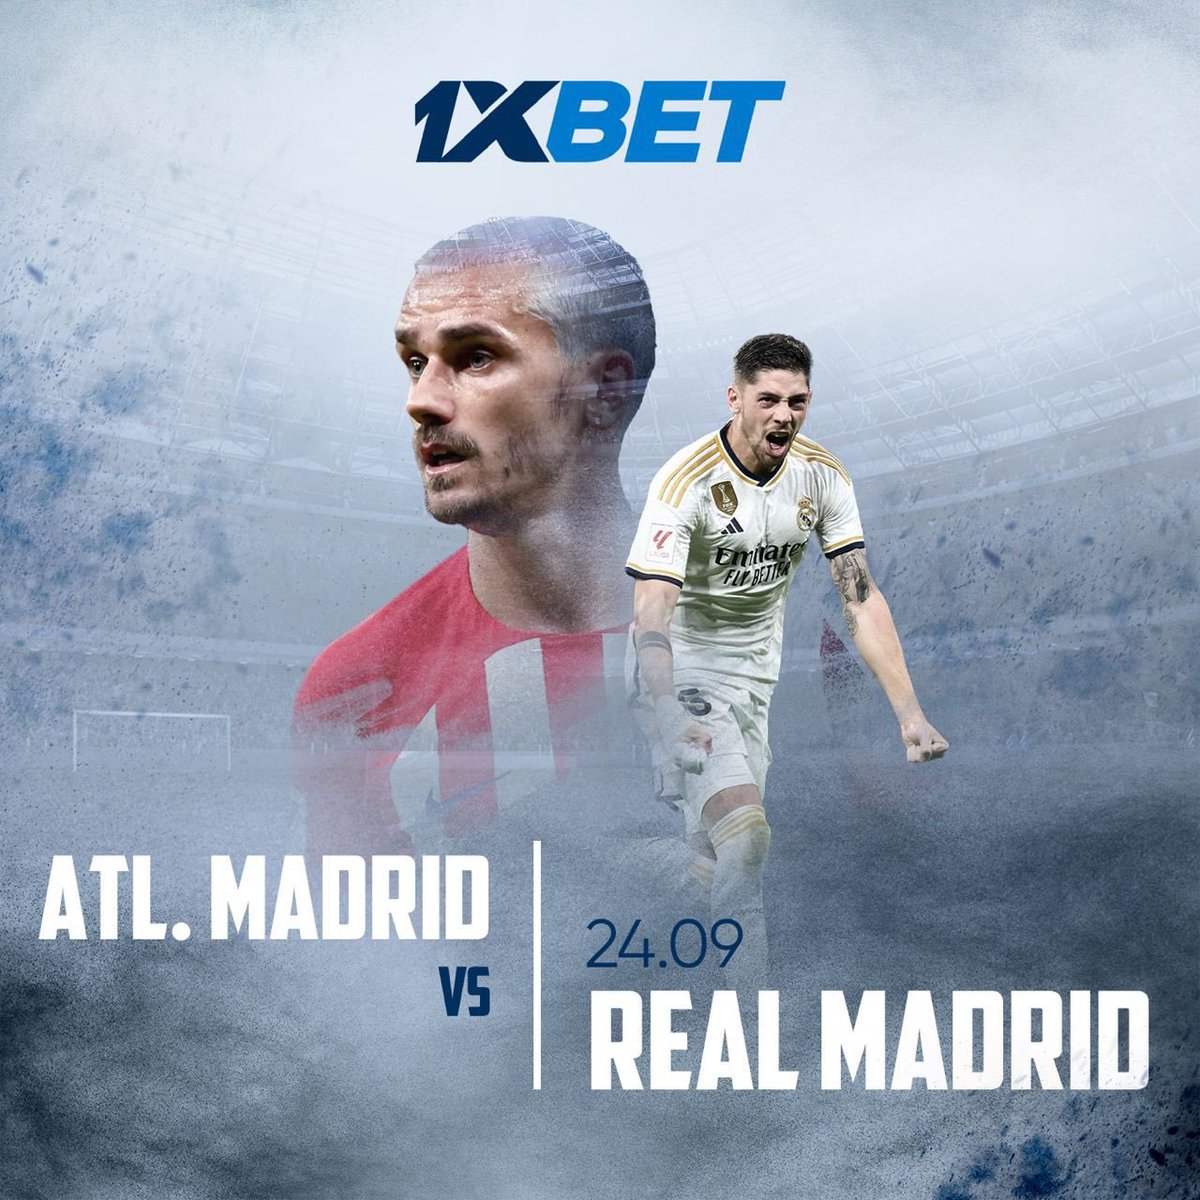 🇪🇸🔥SCRAMBLE IN MADRID: ATLETICO VS REAL MADRID

Make your choice and enjoy Spanish skills with 1xBet!

Using the link ➡️ bit.ly/447KINS and promo code: FRANKCUTEX for bonus on your win ⚽️